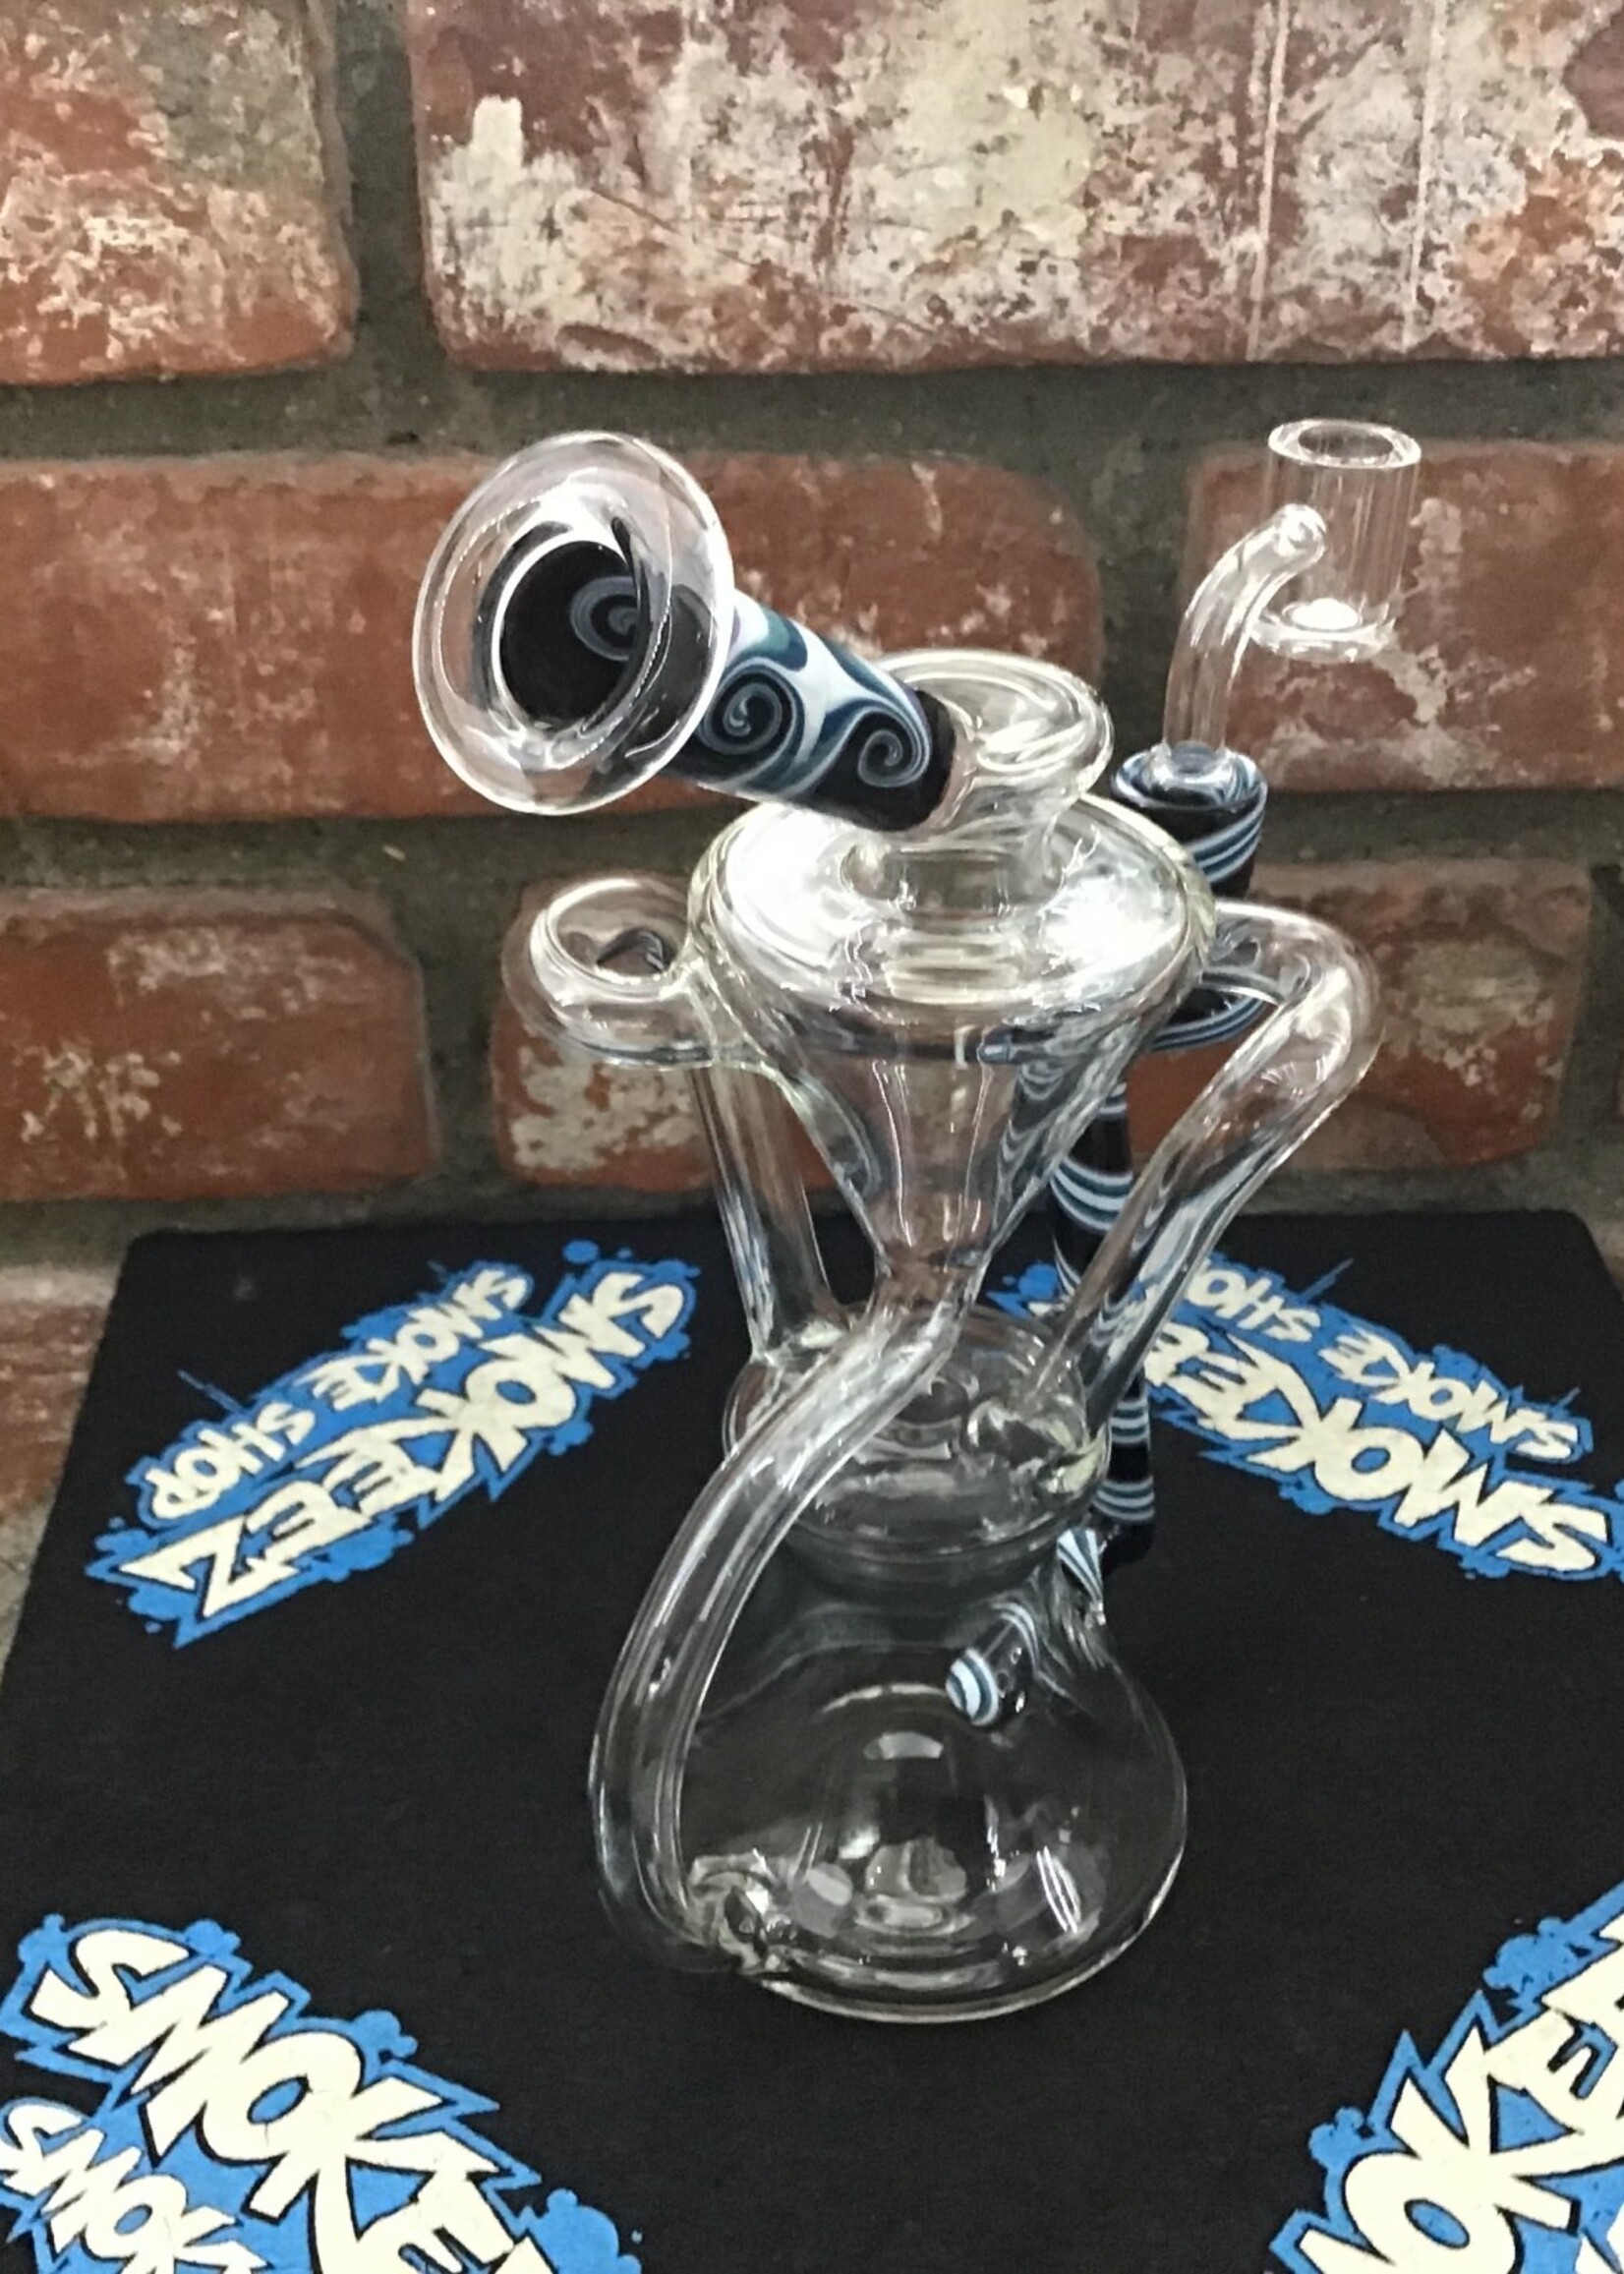 Double Uptake Recycler 14mm